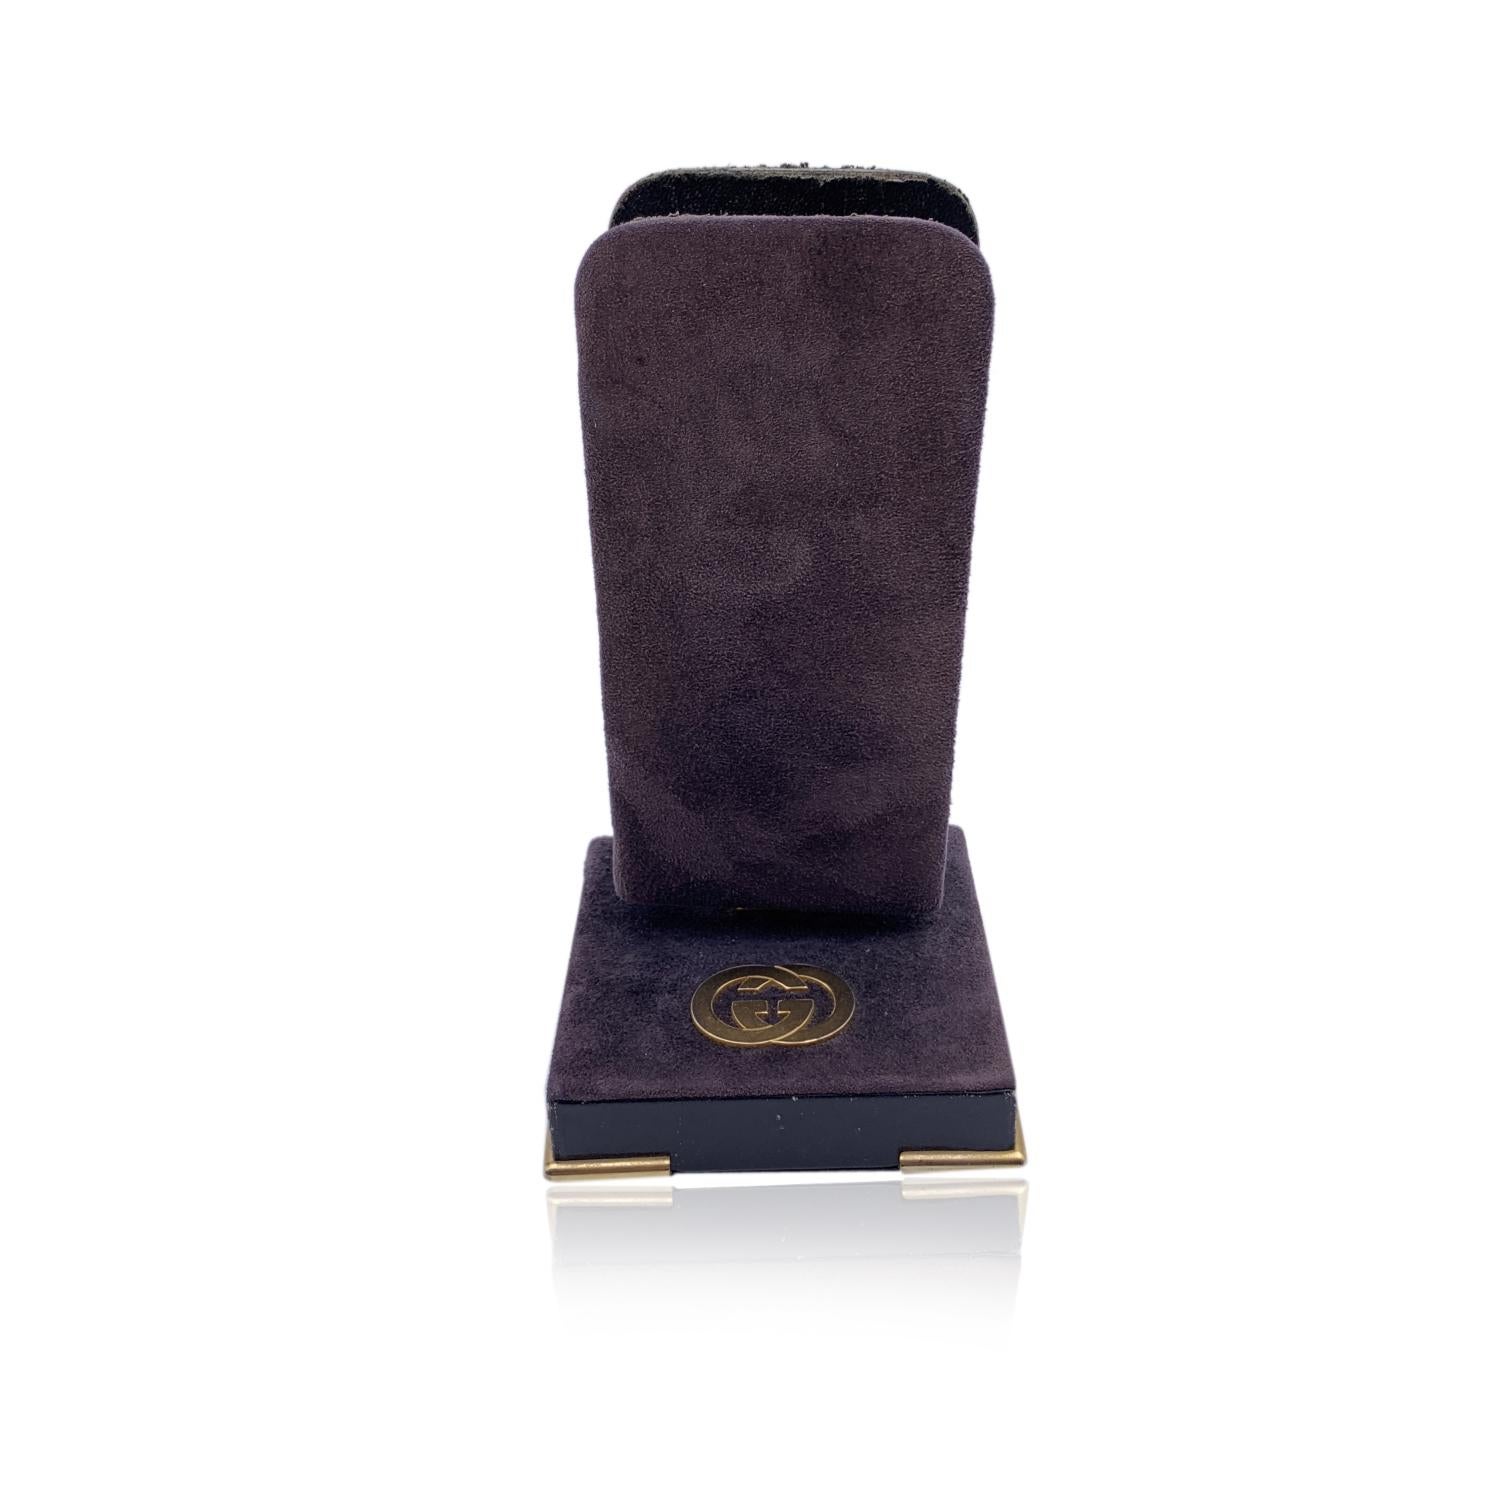 Vintage Gucci pen holder covered in brown leather and suede. GG logo in golden metal on the base. The upper part is rotatable. 'Made in Italy by Gucci' embossed on the bottom.

Details

MATERIAL: Suede

COLOR: Brown

MODEL: -

GENDER: Unisex